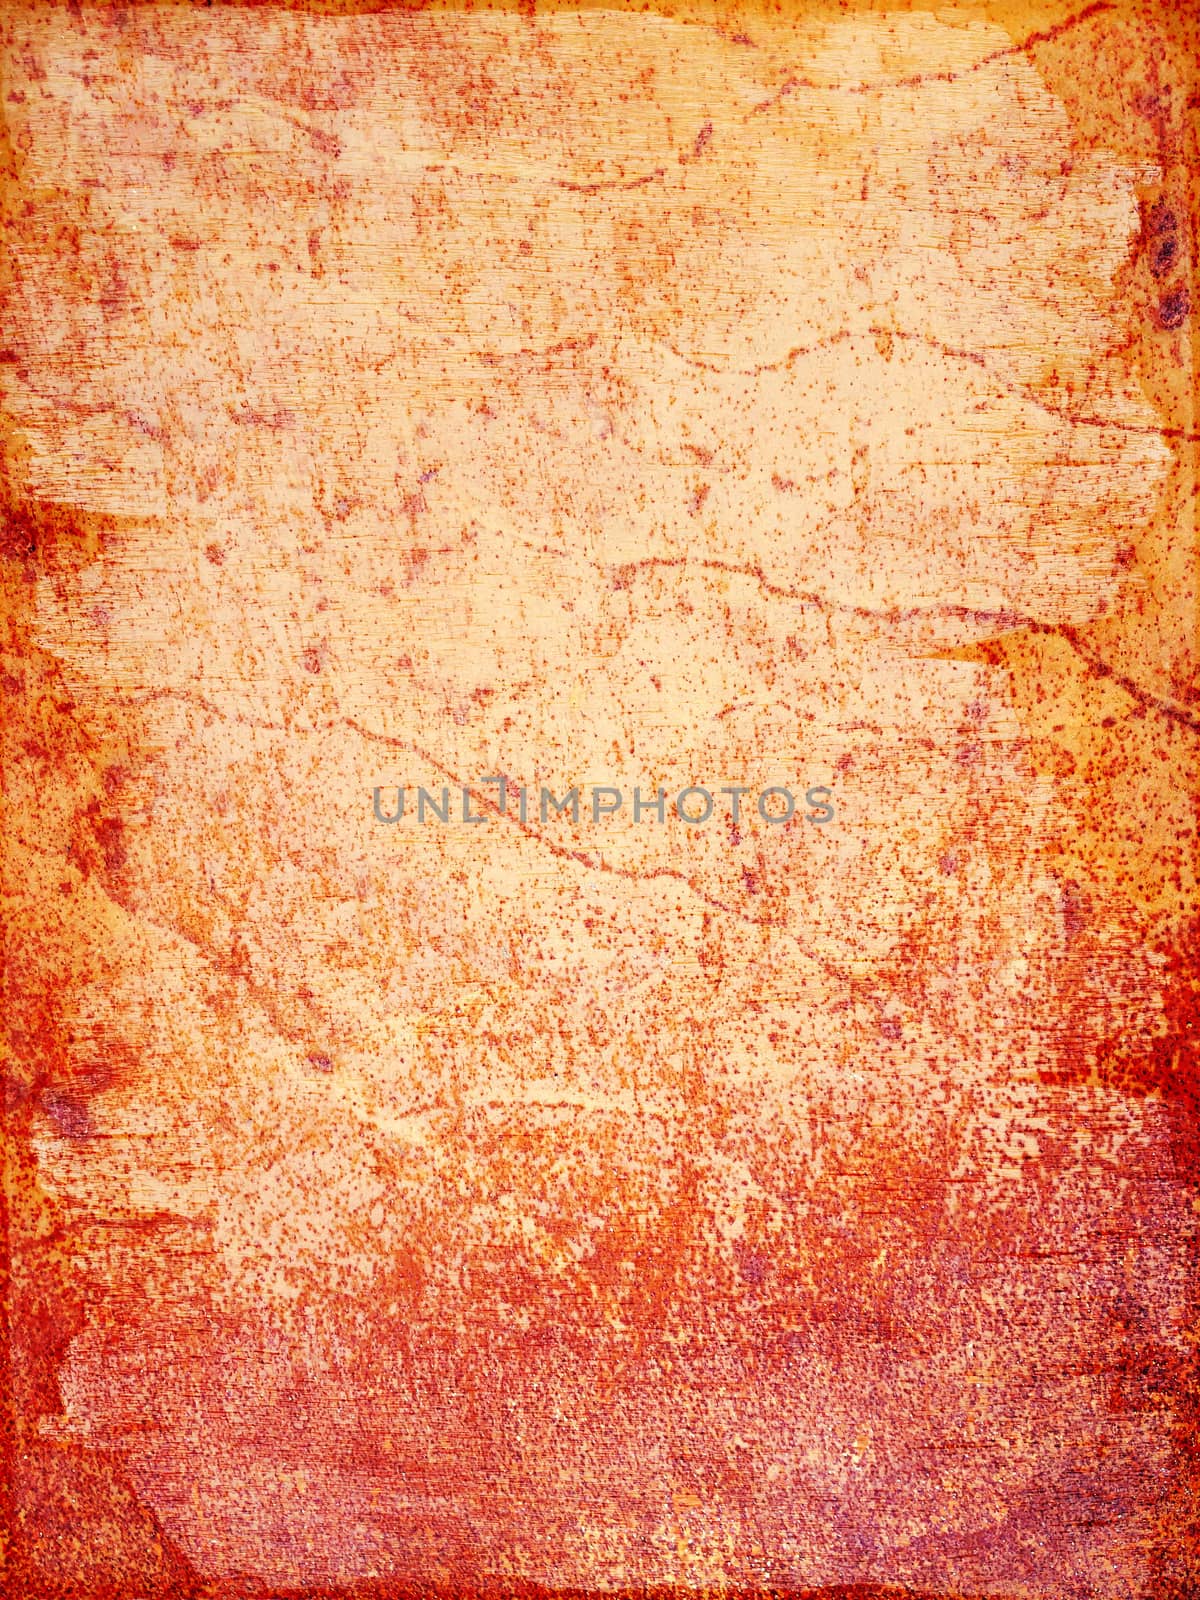 Red and orange rusty metal background by anikasalsera